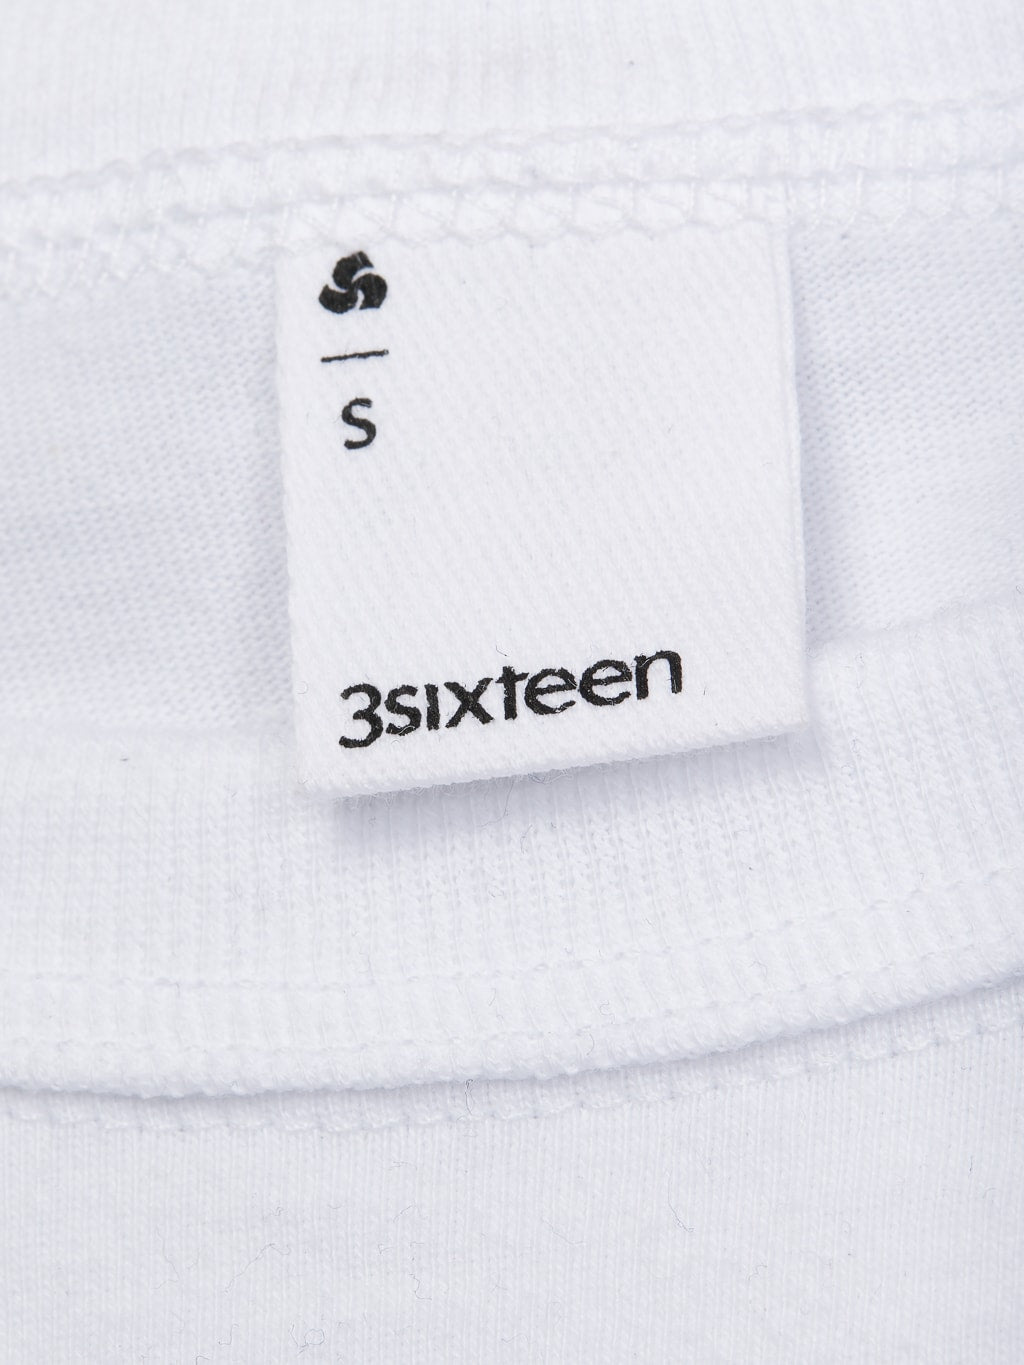 3sixteen Heavyweight TShirt Heather white 2 Pack interior size tag